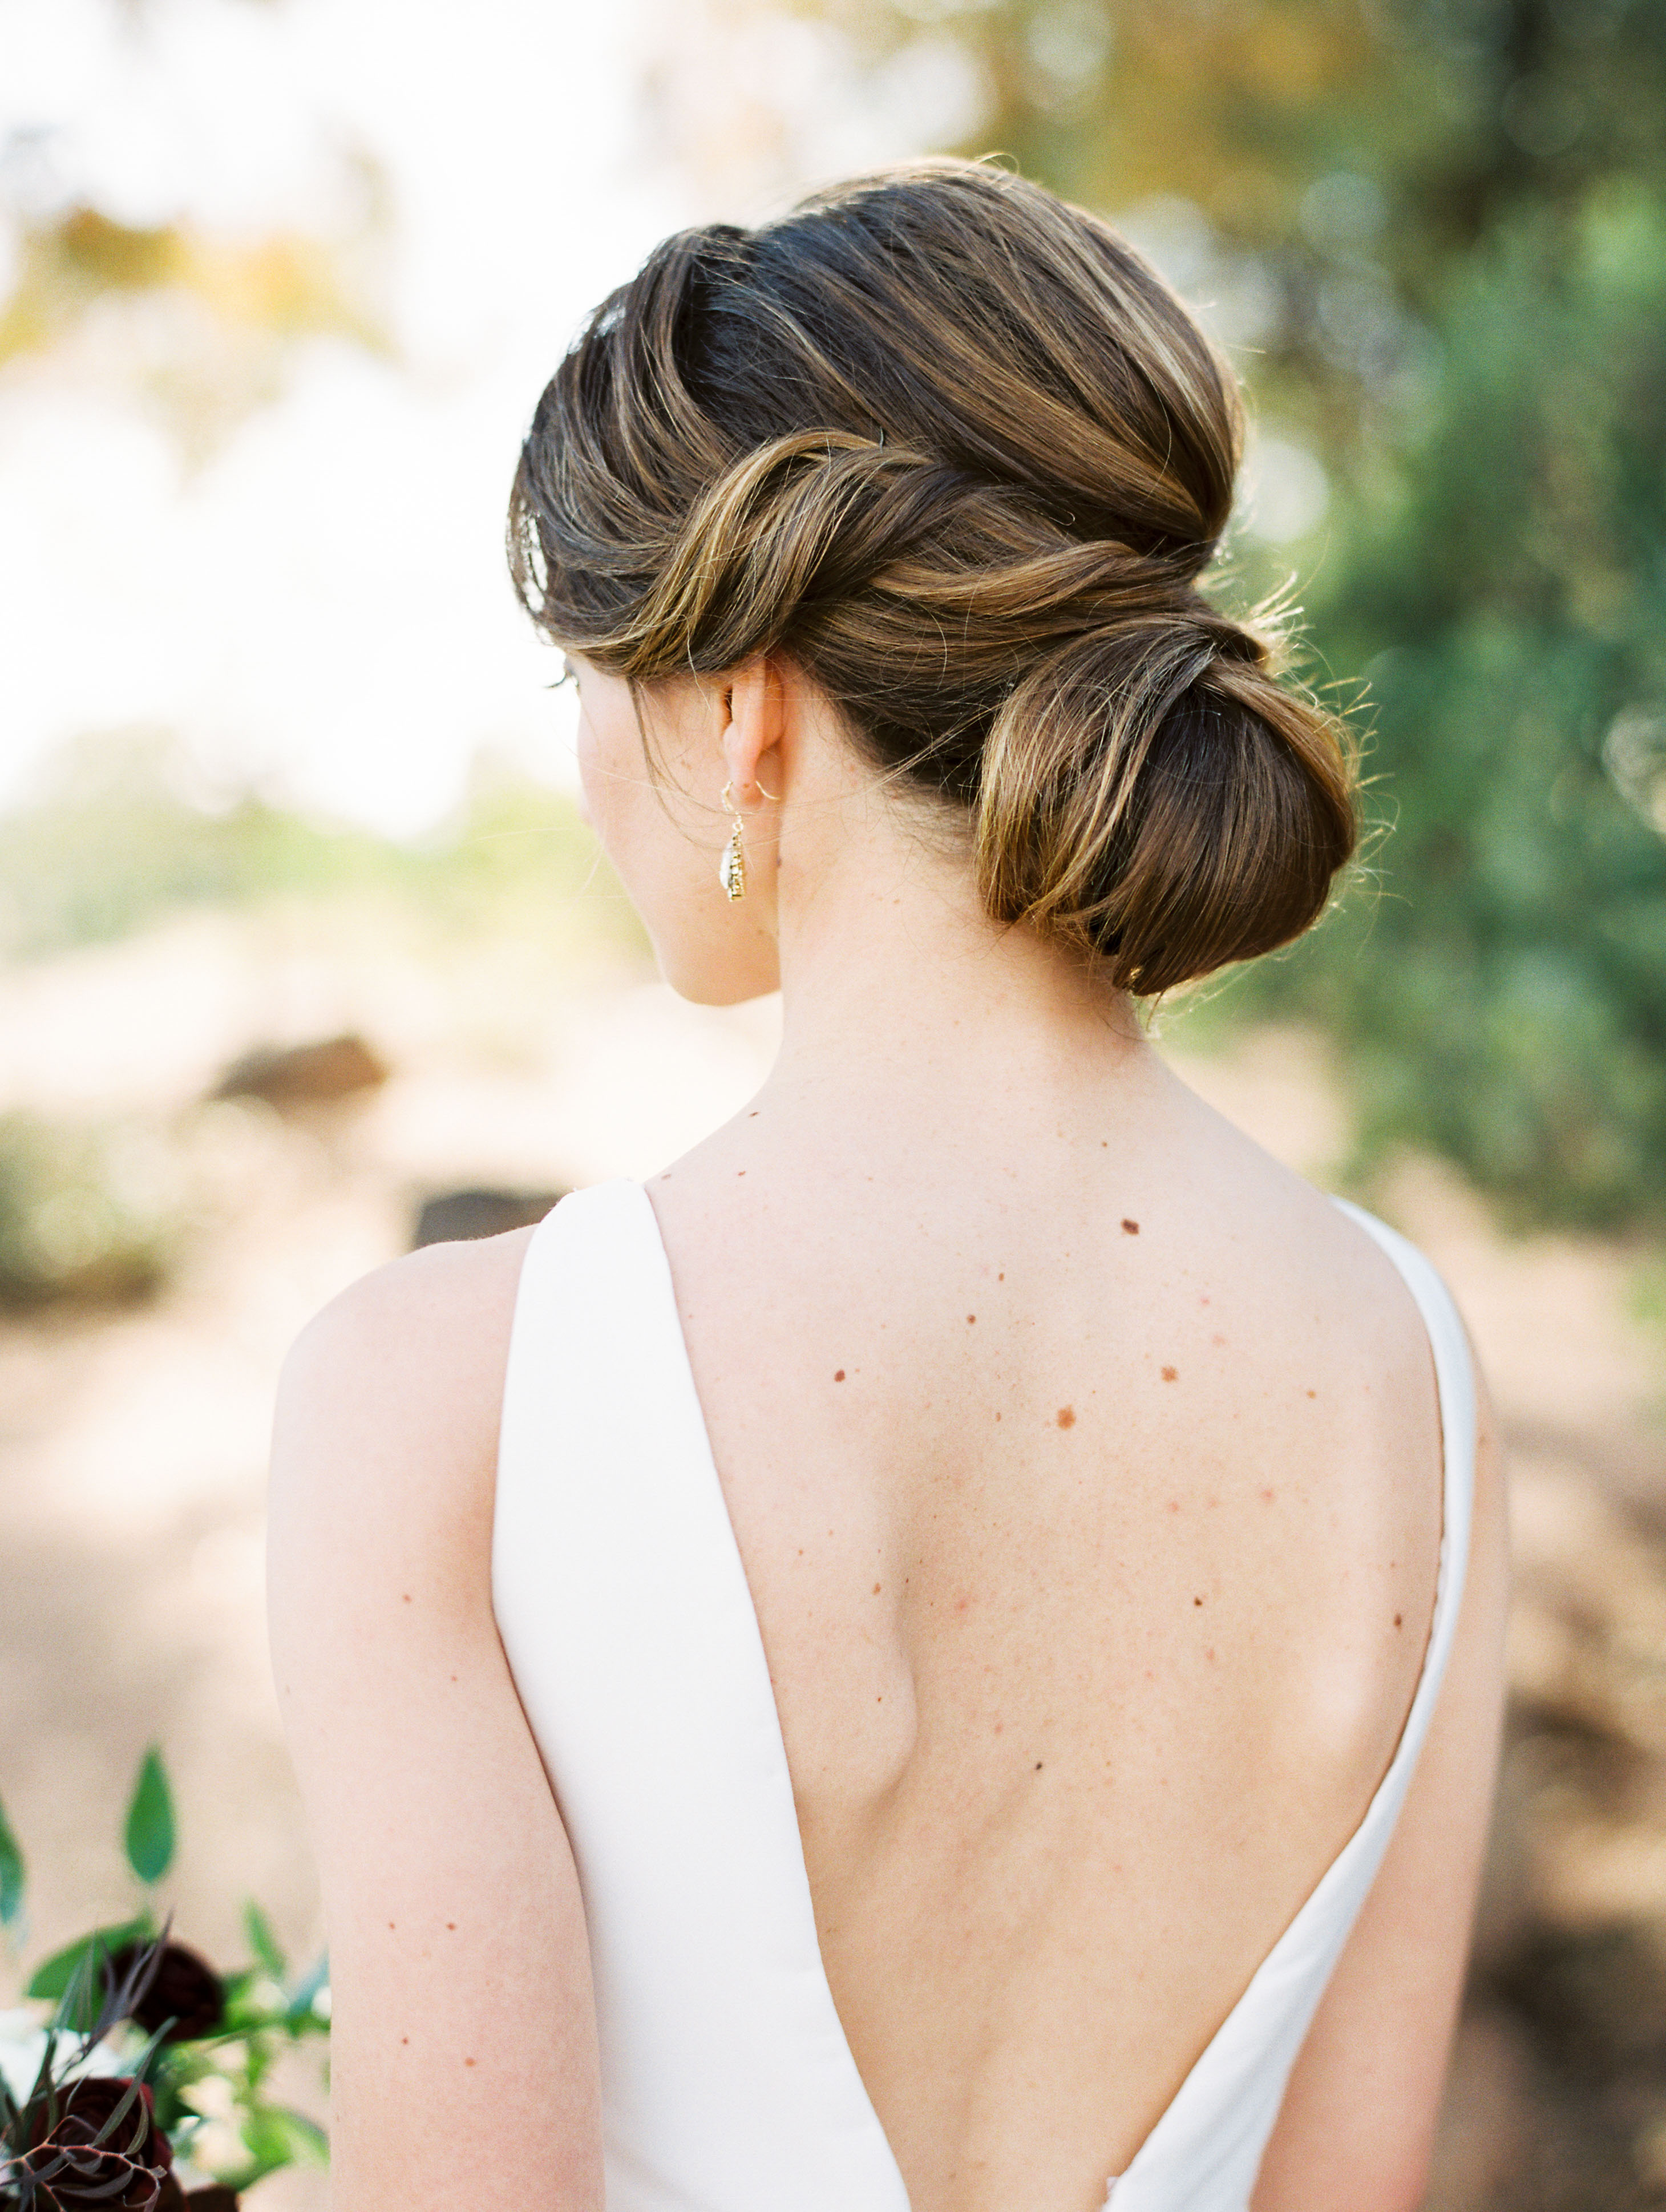 20 Ways to Style Your Hair in a Low Bun on Your Wedding Day | Martha